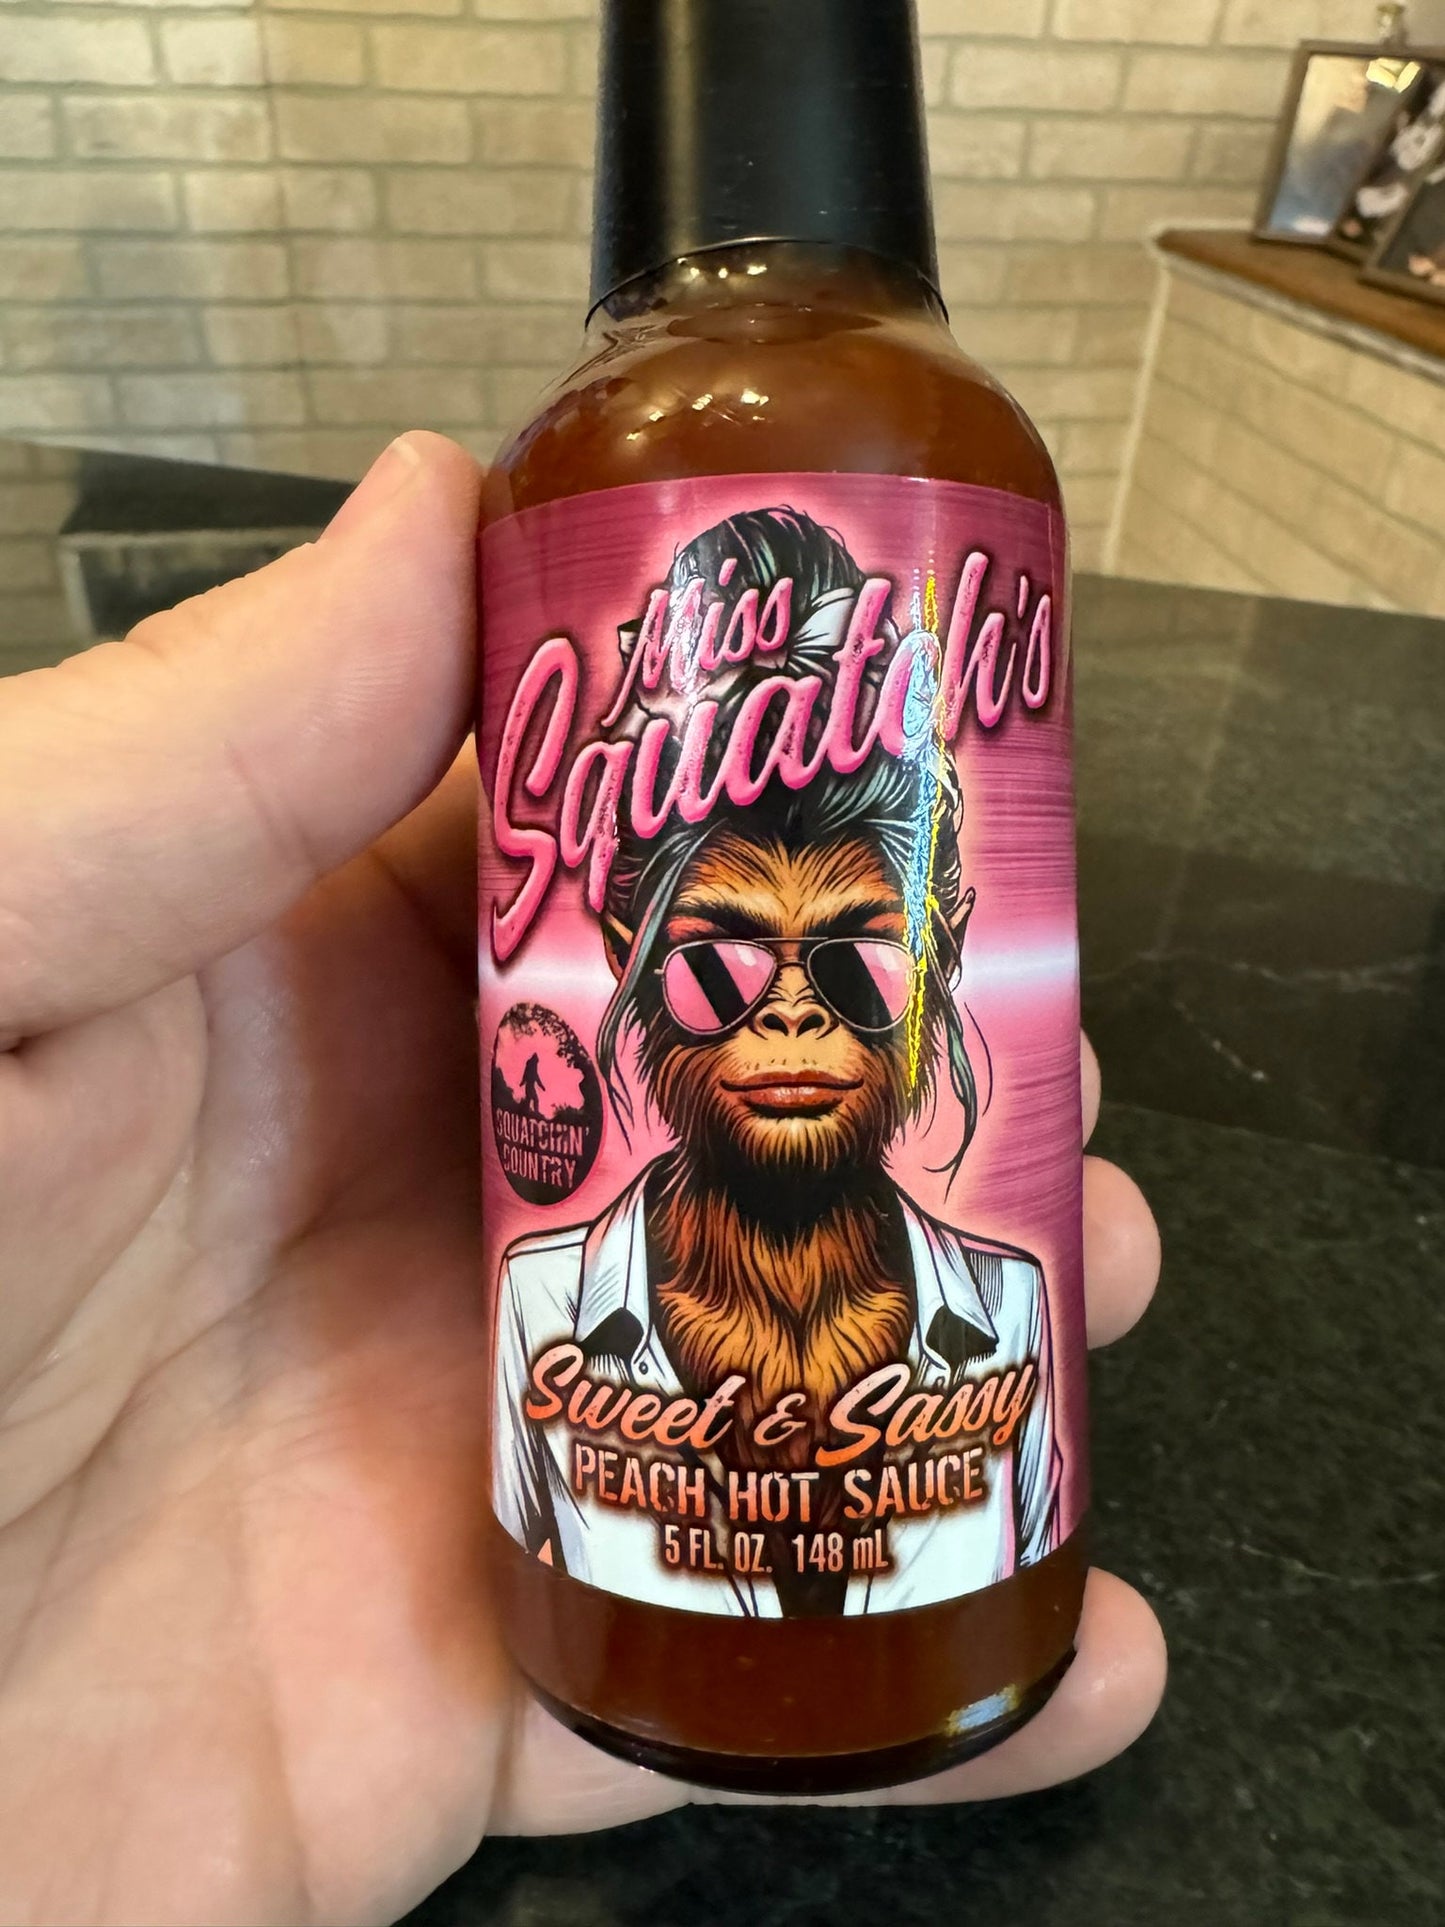 Miss Squatch's Sweet & Sassy Peach Hot Sauce from Squatchin' Country